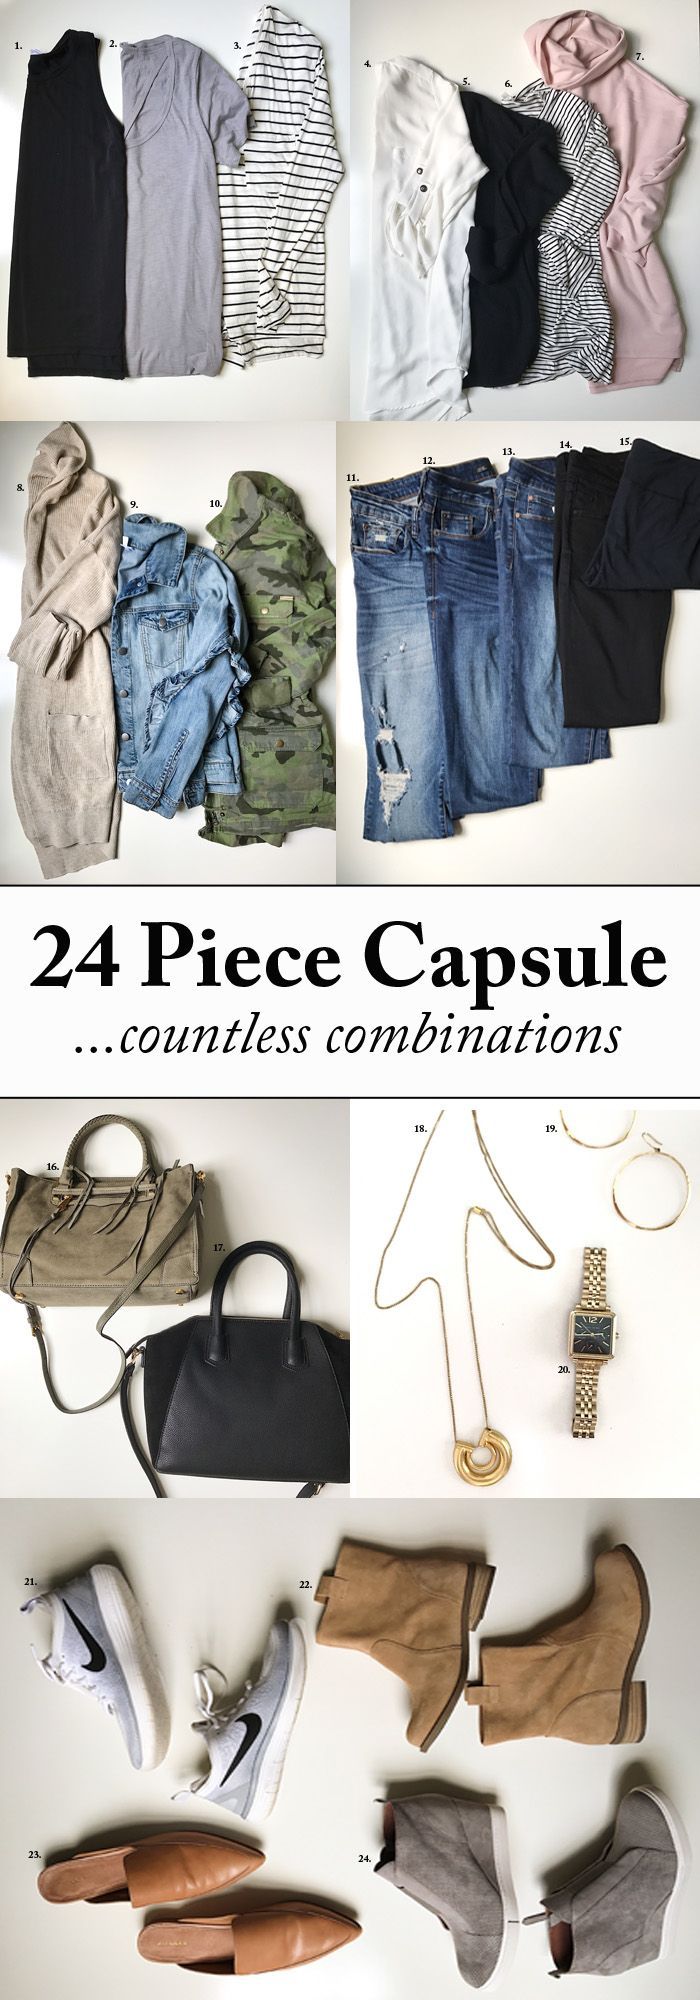 One of my favorite posts to date! Sharing a functional, comfy & chic Fall Capsule Wardrobe for busy moms! Only 25 affordable